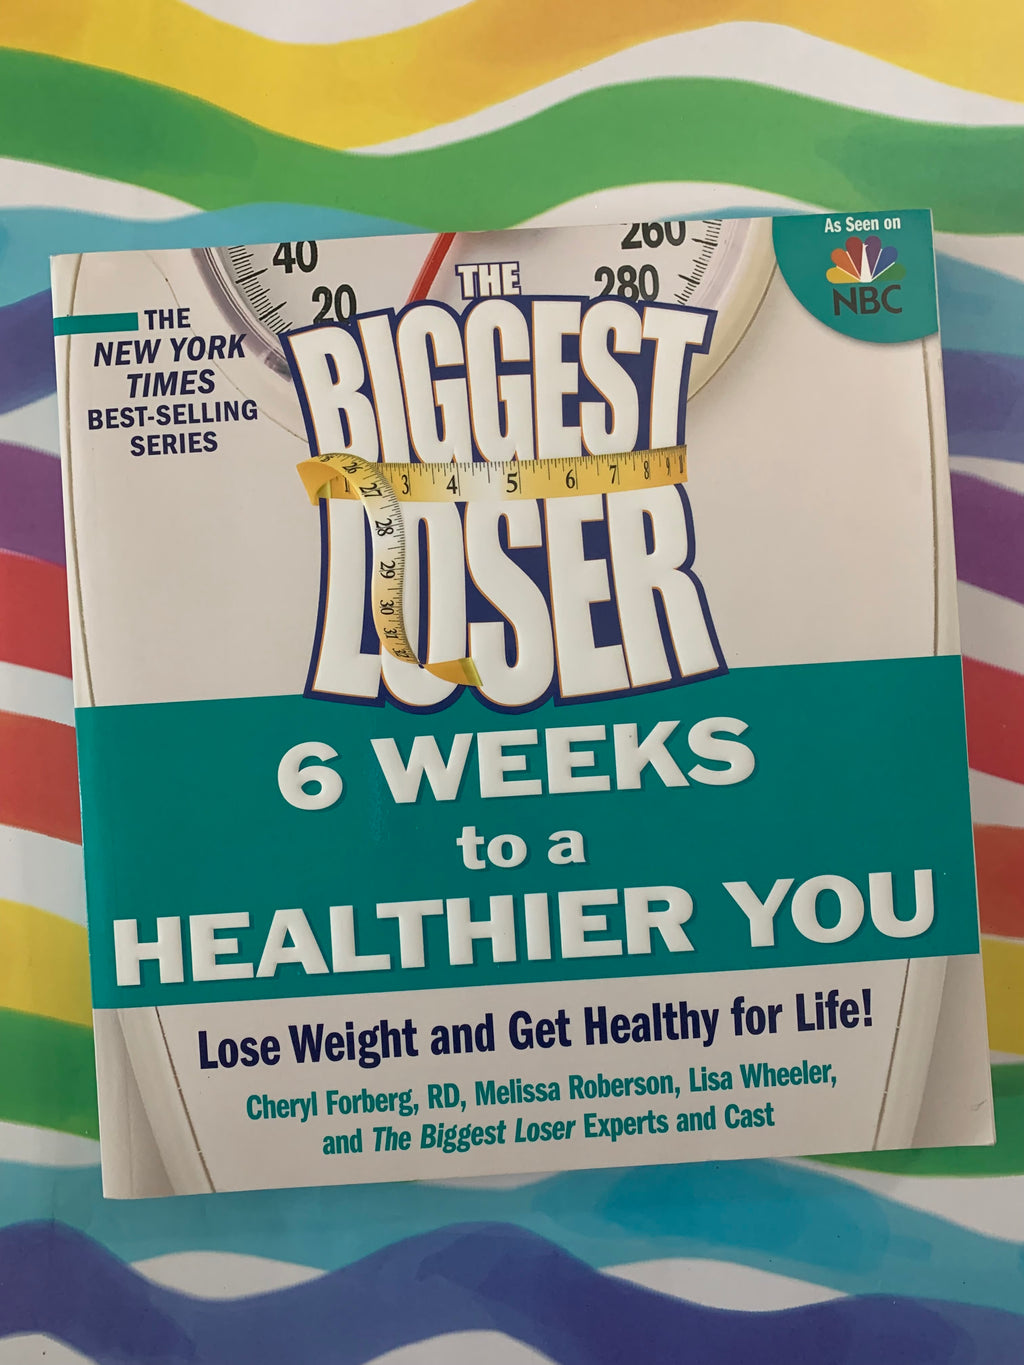 The Biggest Loser: 6 Weeks to a Healthier You- By Cheryl Forberg, RD, Melissa Roberson, Lisa Wheeler